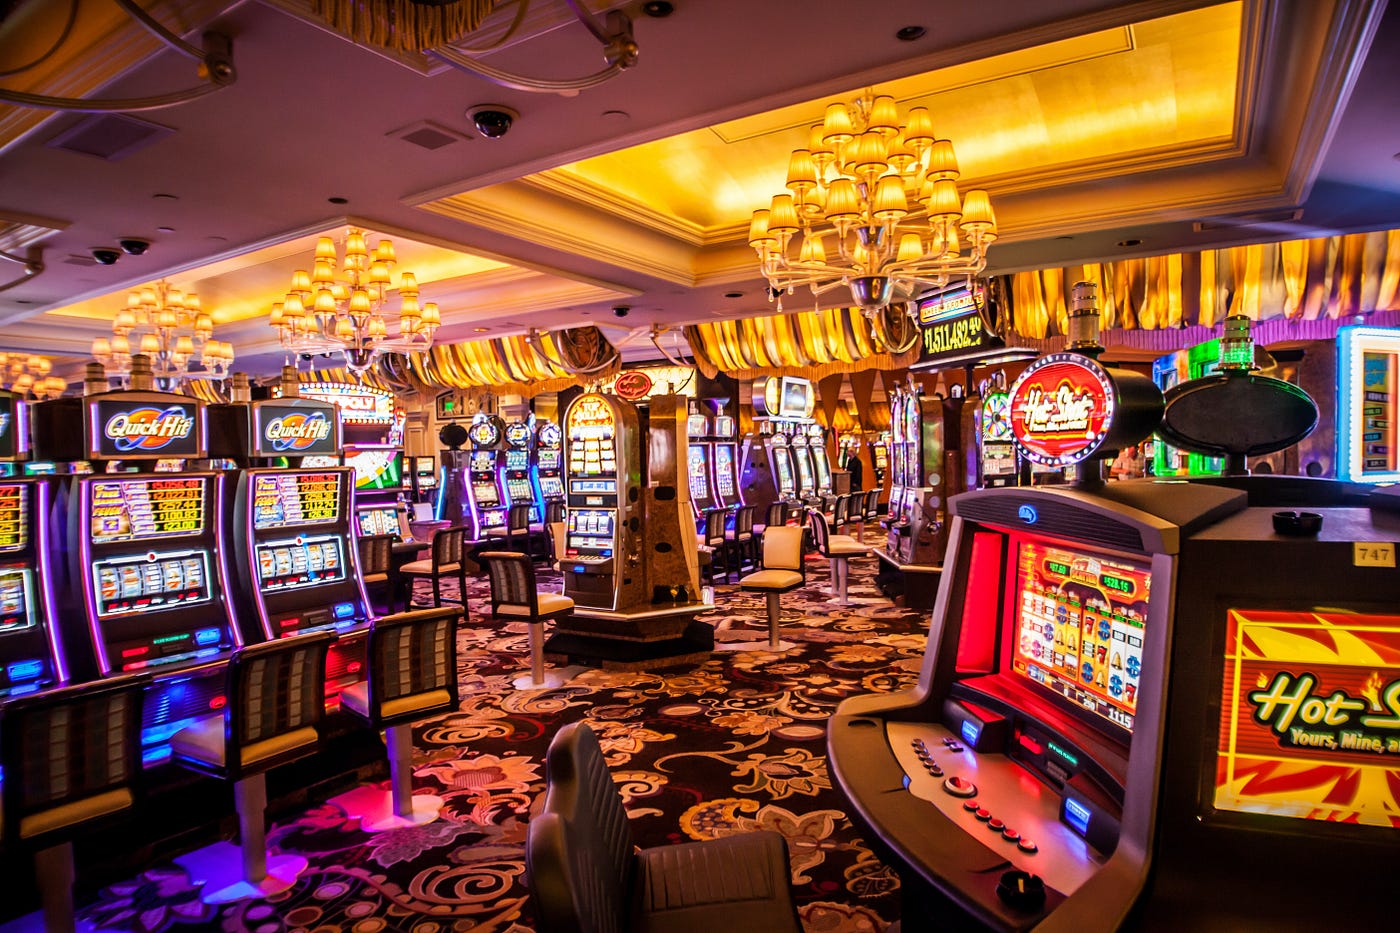 Recognizing the Signs of Slot Machine Addiction